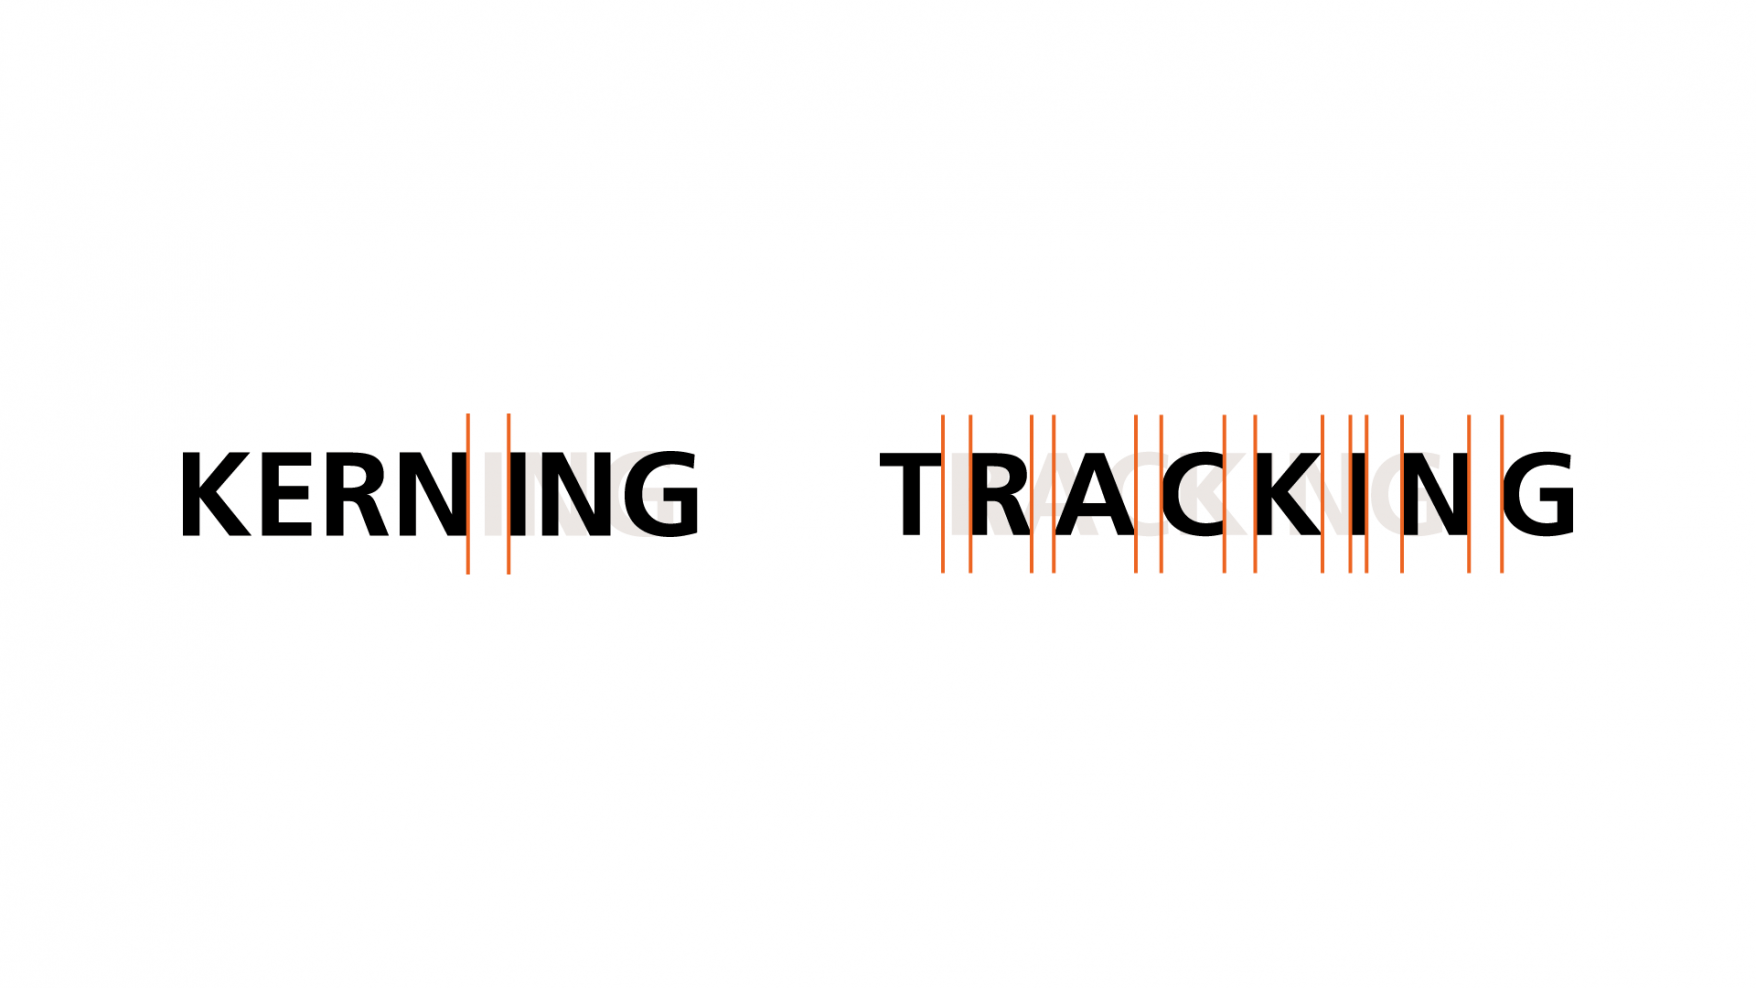 font differenze kerning tracking